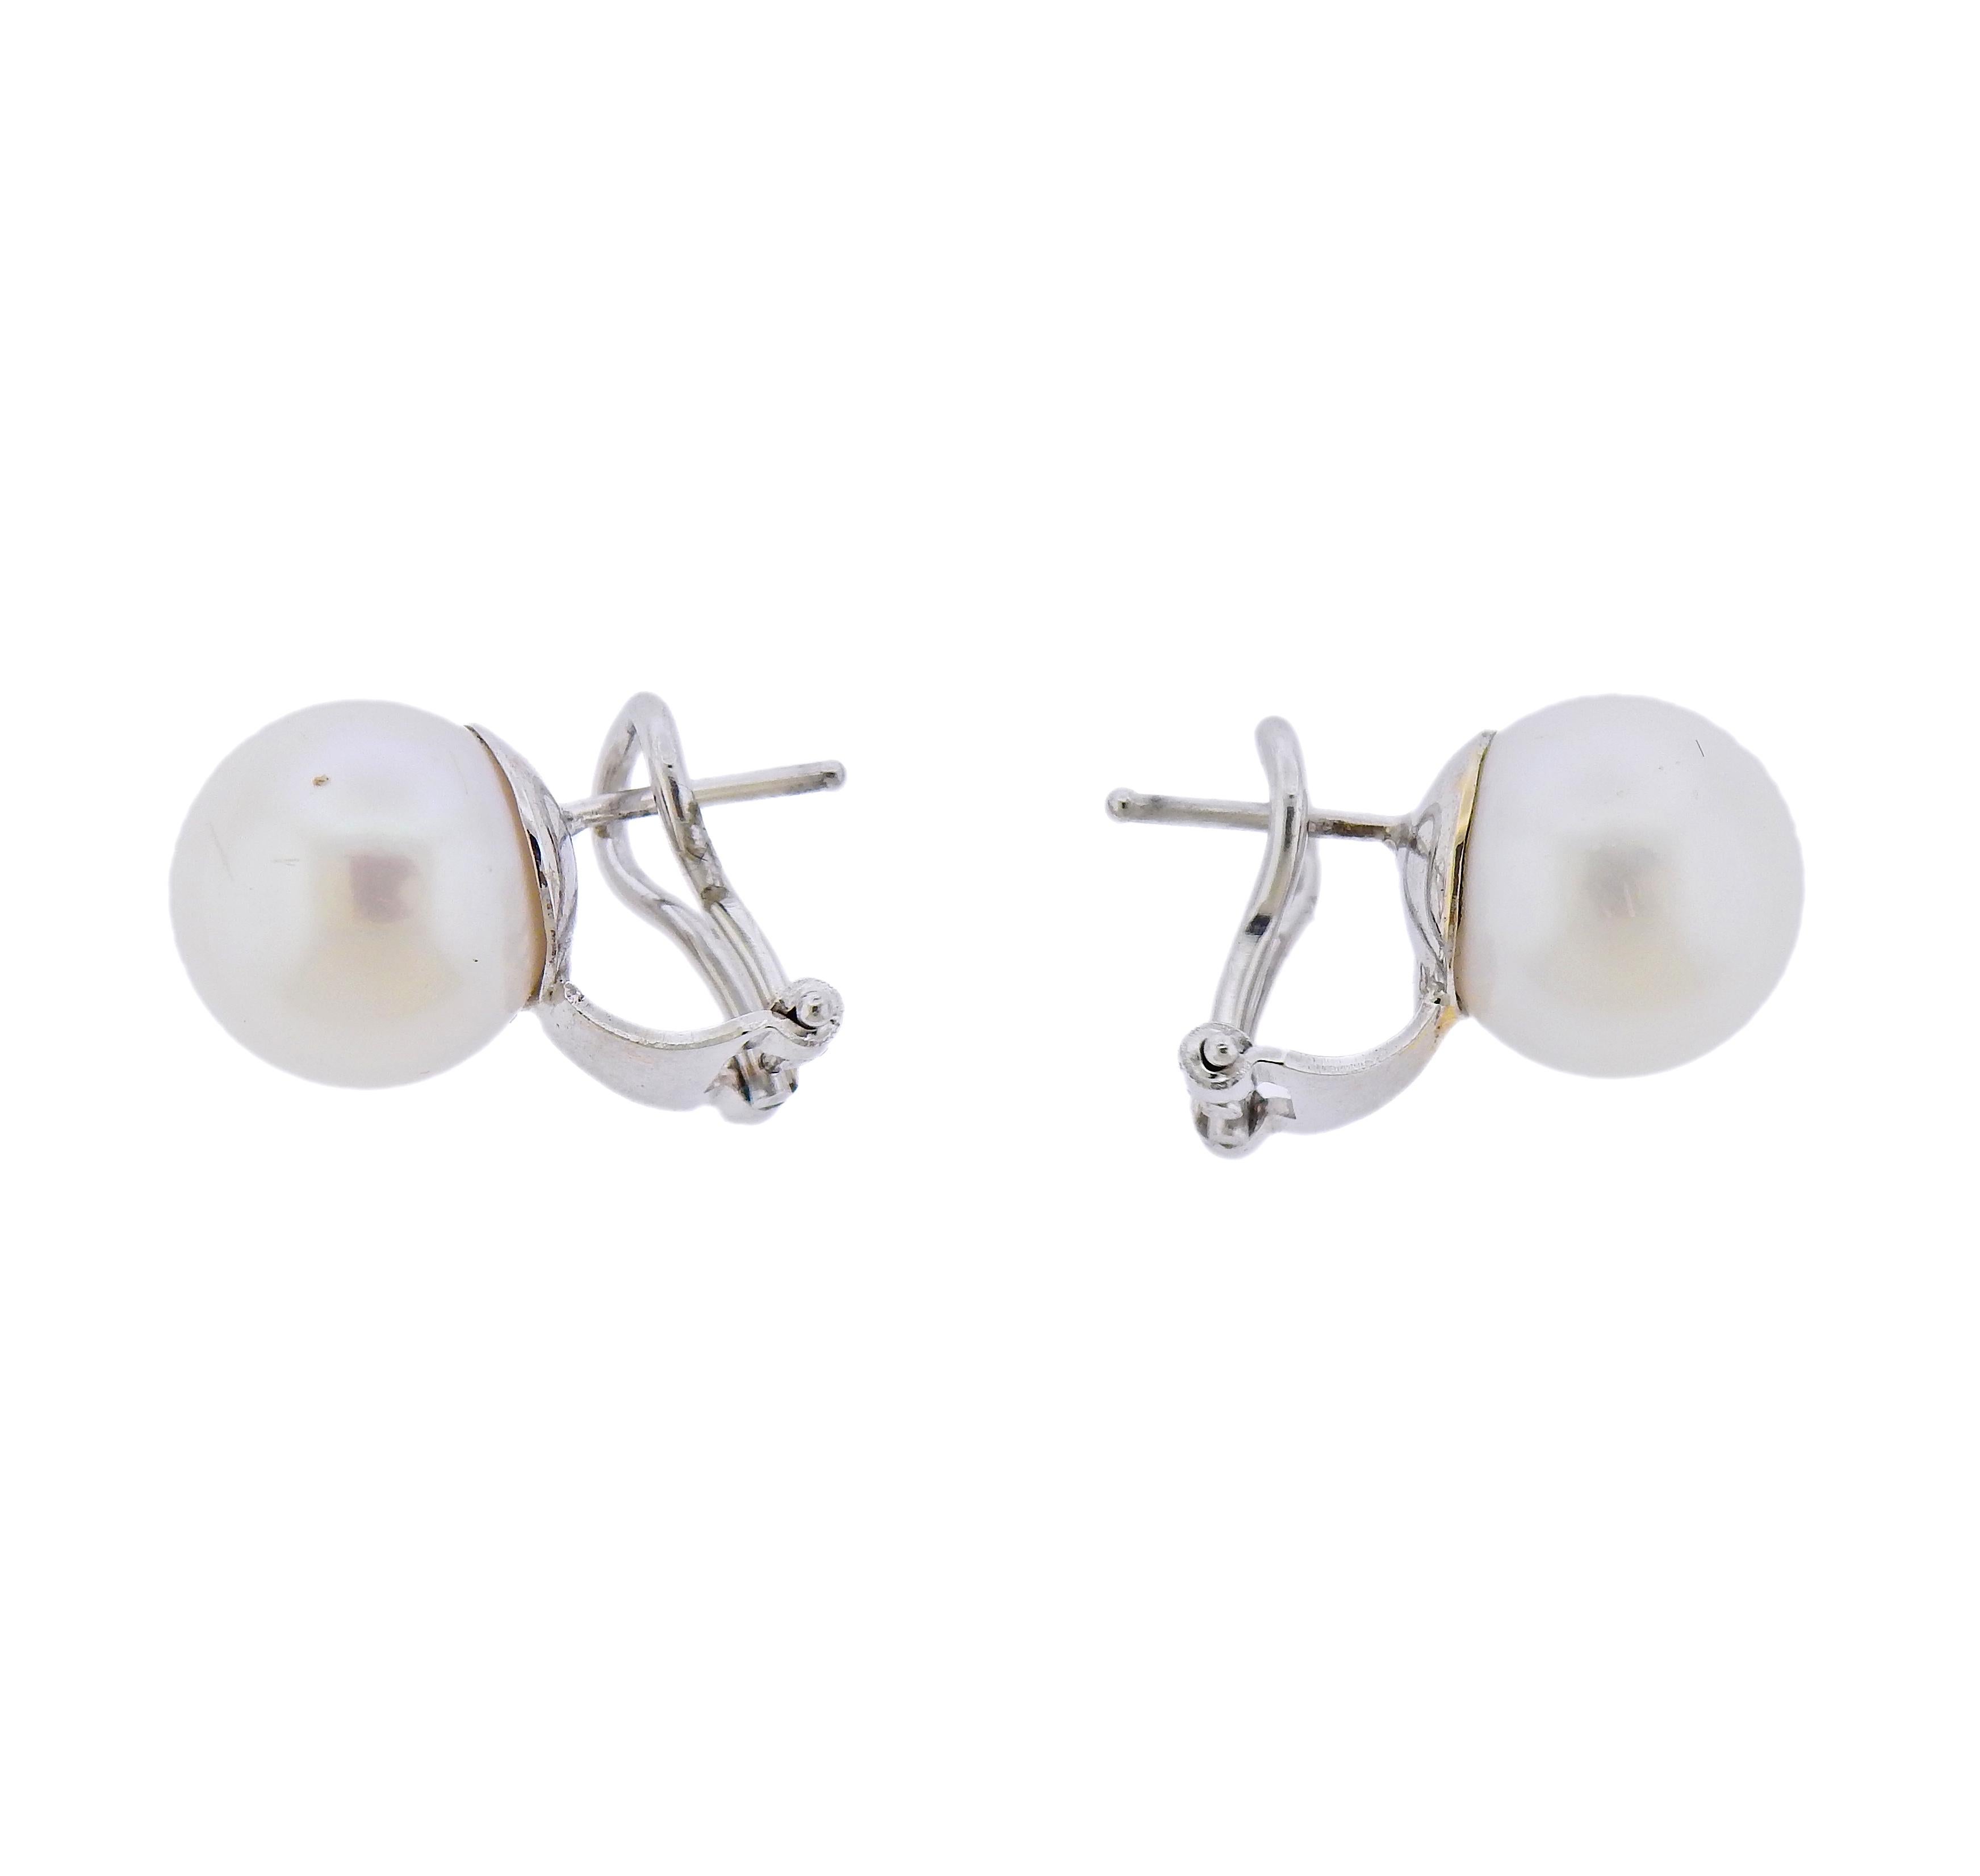 Pair of 18k white gold earrings with 11.5mm South Sea pearls. Marked: 750. weight - 7.1 grams. 